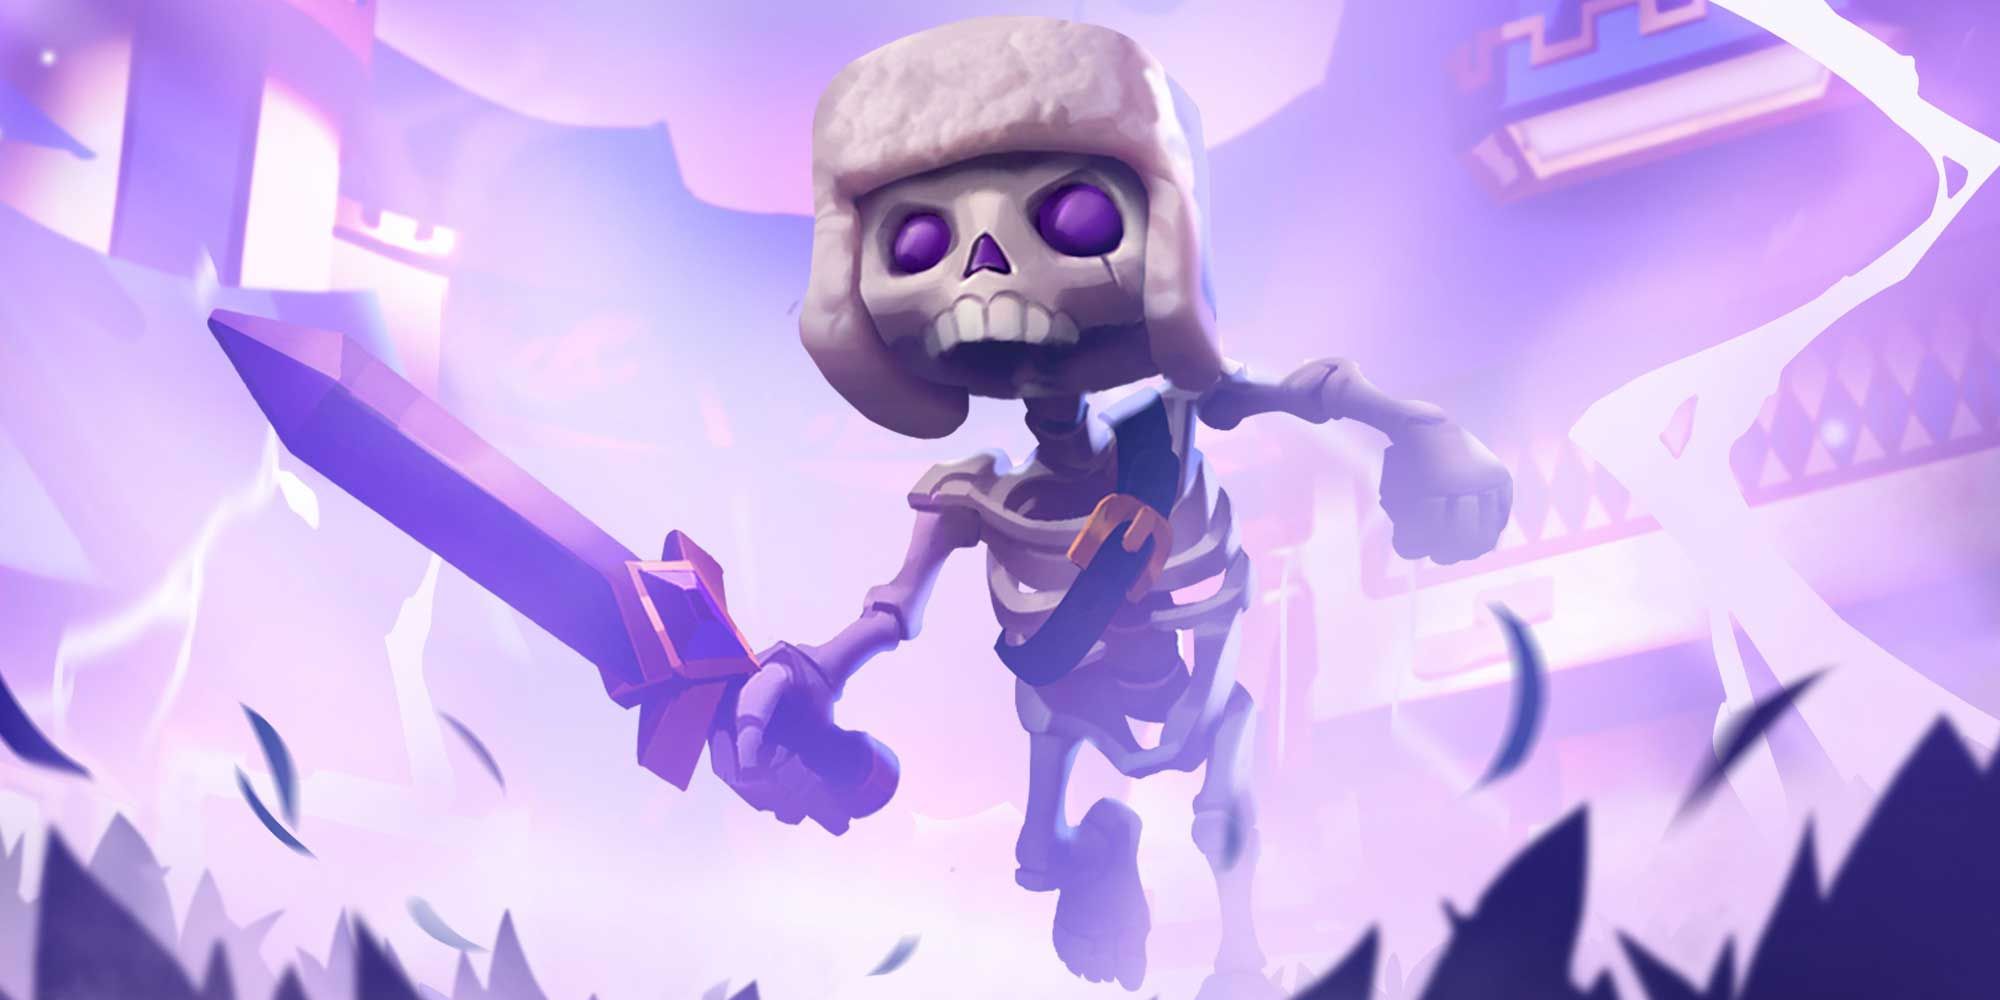 Clash-Royale-Best-Card-Evolutions-To-Unlock-First---Skeletons